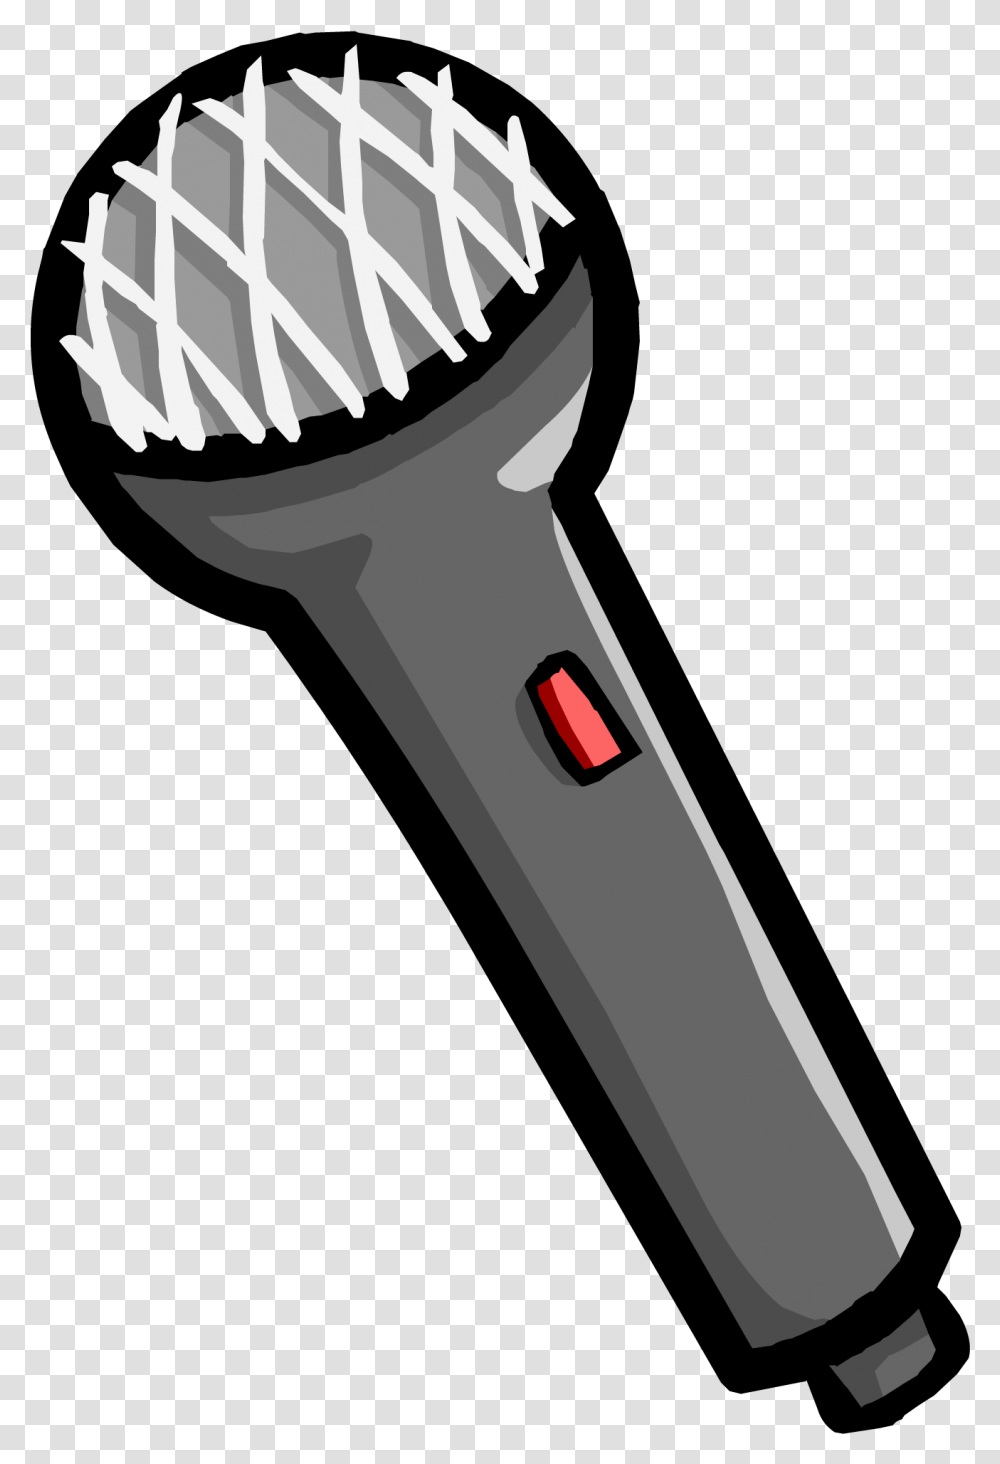 Download Microphone Icon Club Penguin Microphone Clip Art, Tool, Brush, Toothbrush, Blow Dryer Transparent Png